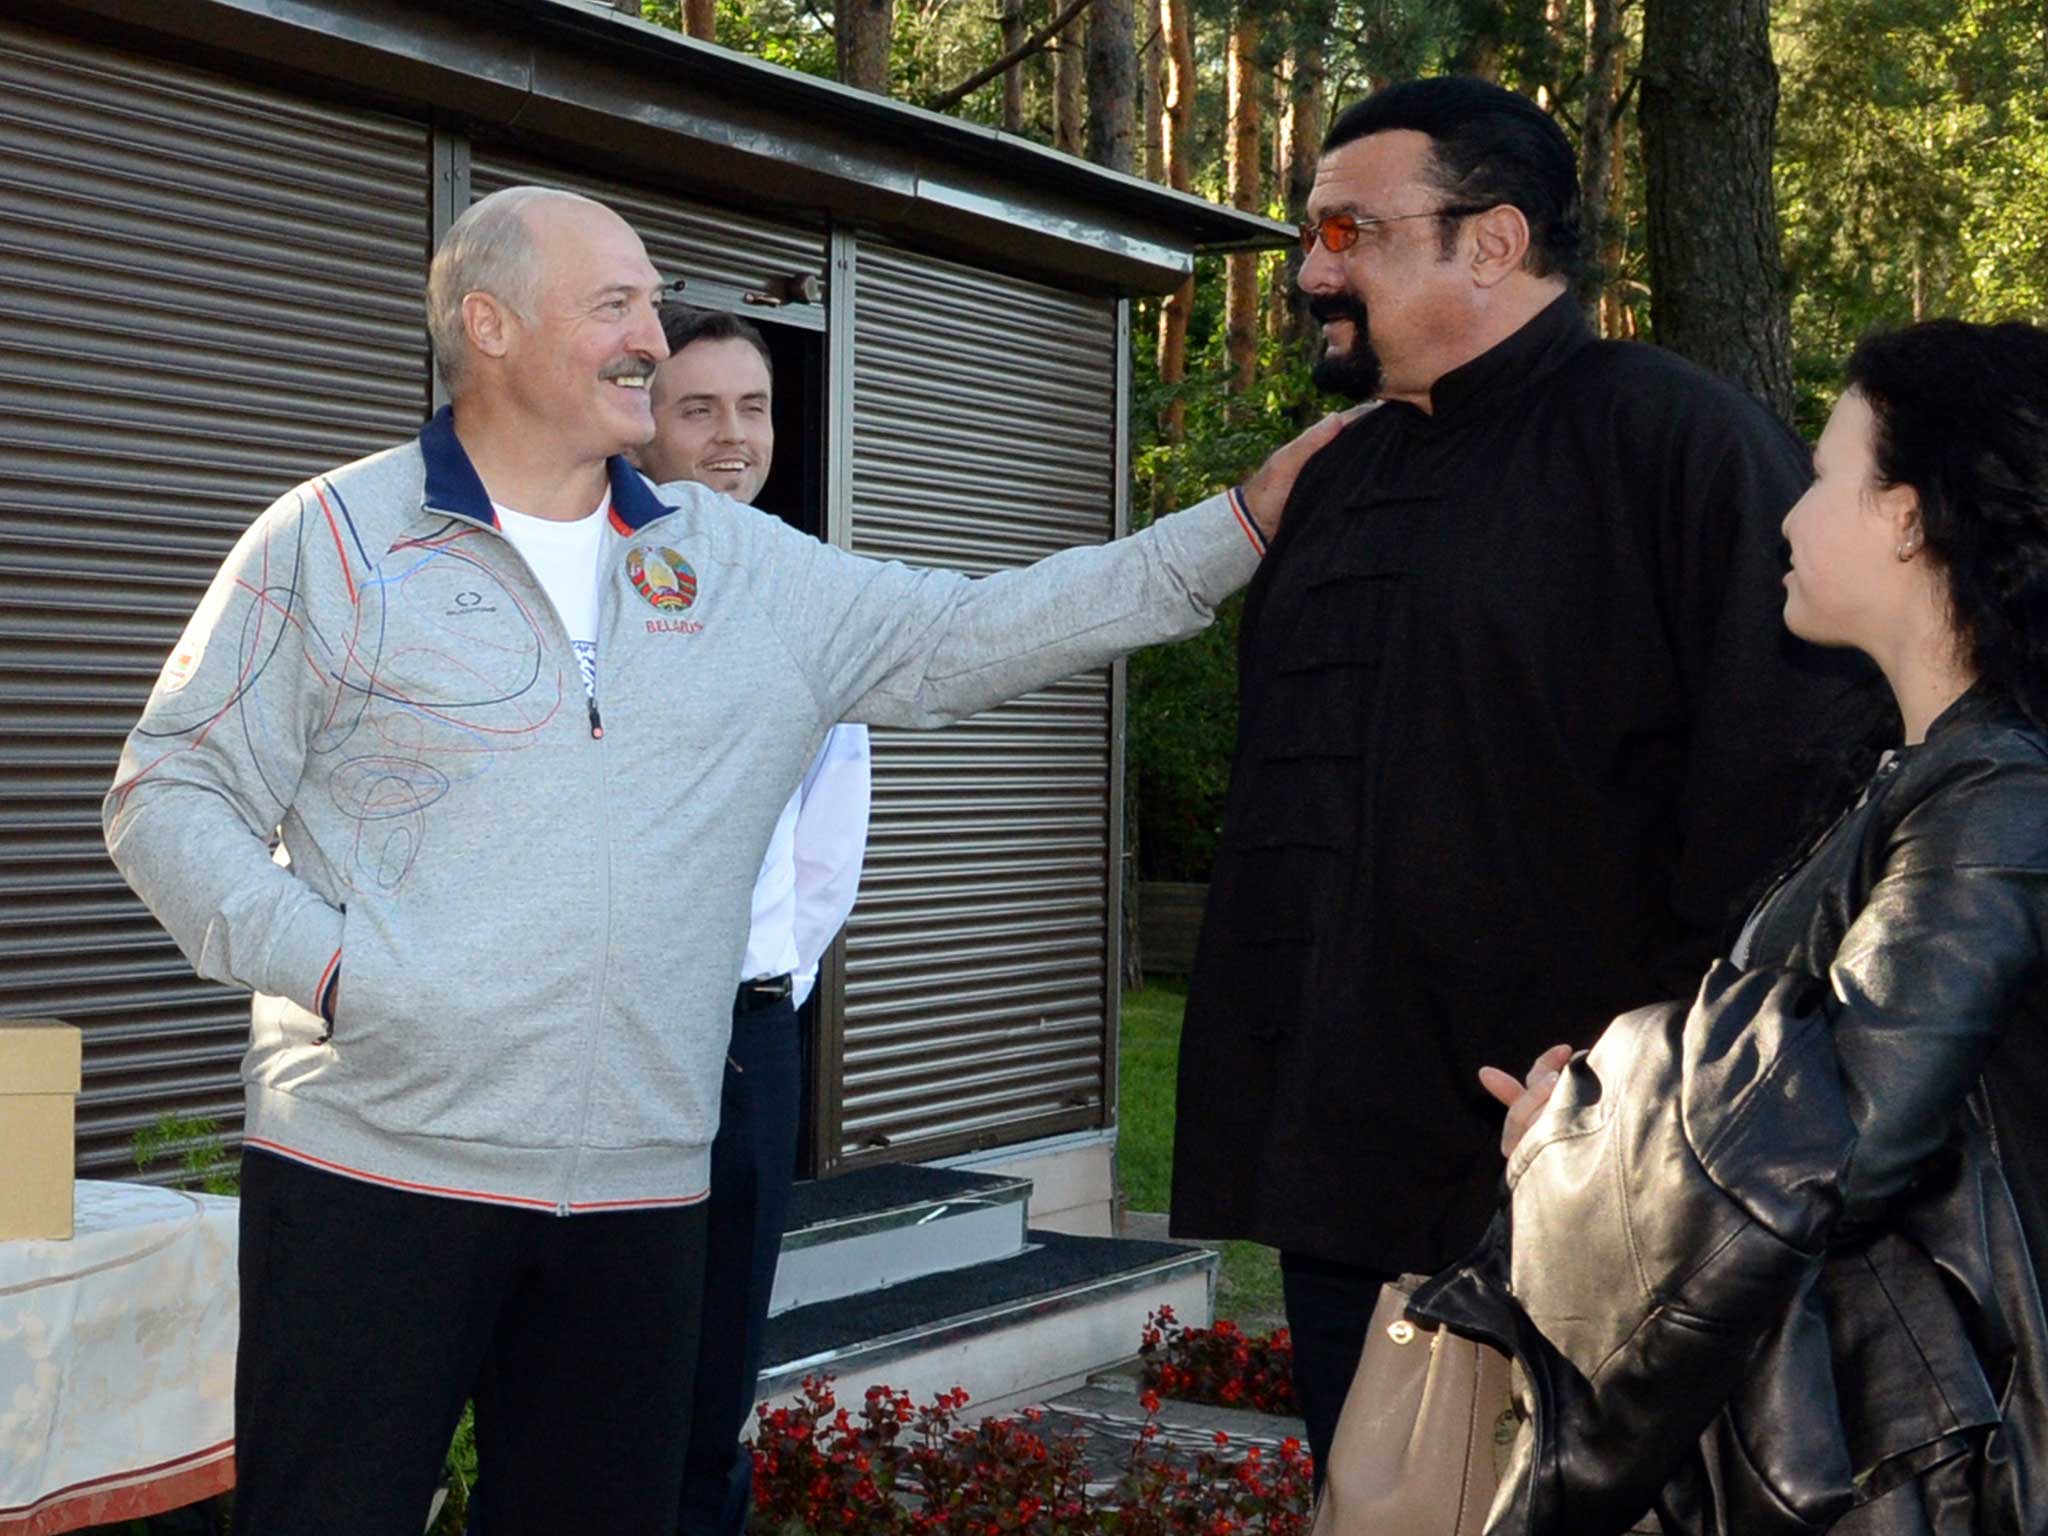 Belarusian President Alexander Lukashenko, known as the last dictator of Europe, welcomes Seagal